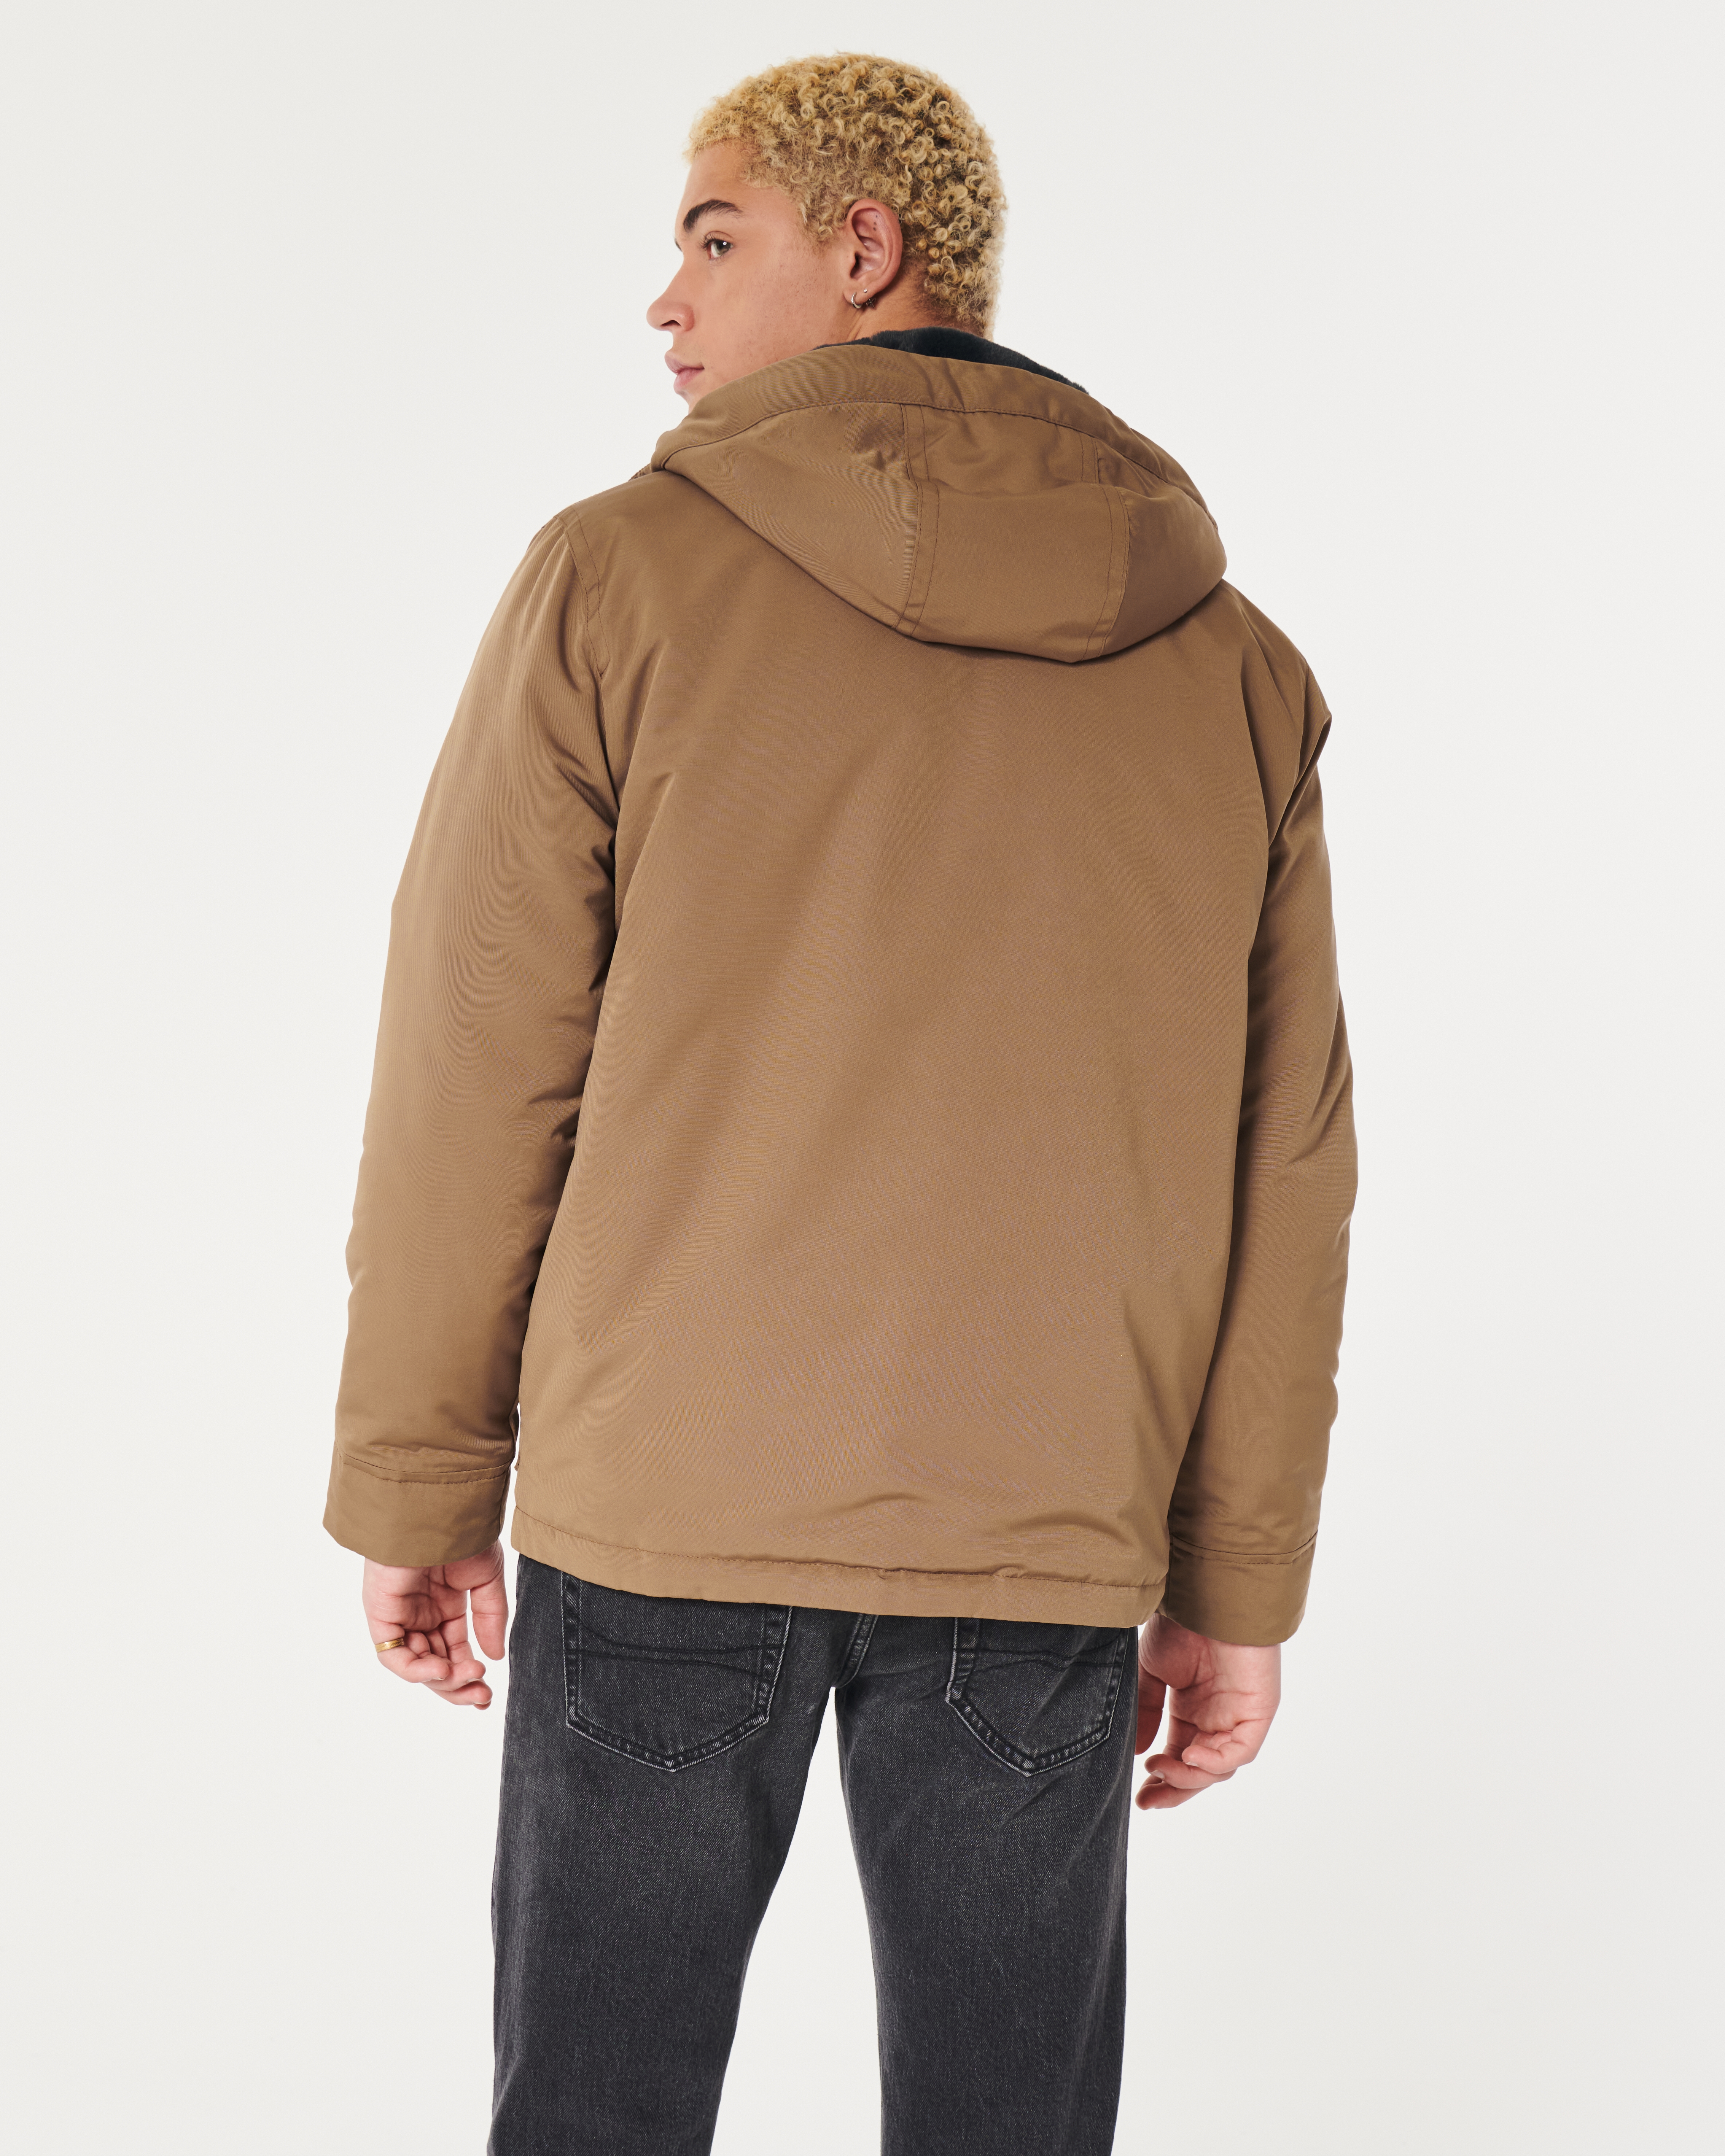 Hollister All-Weather Winter Jacket